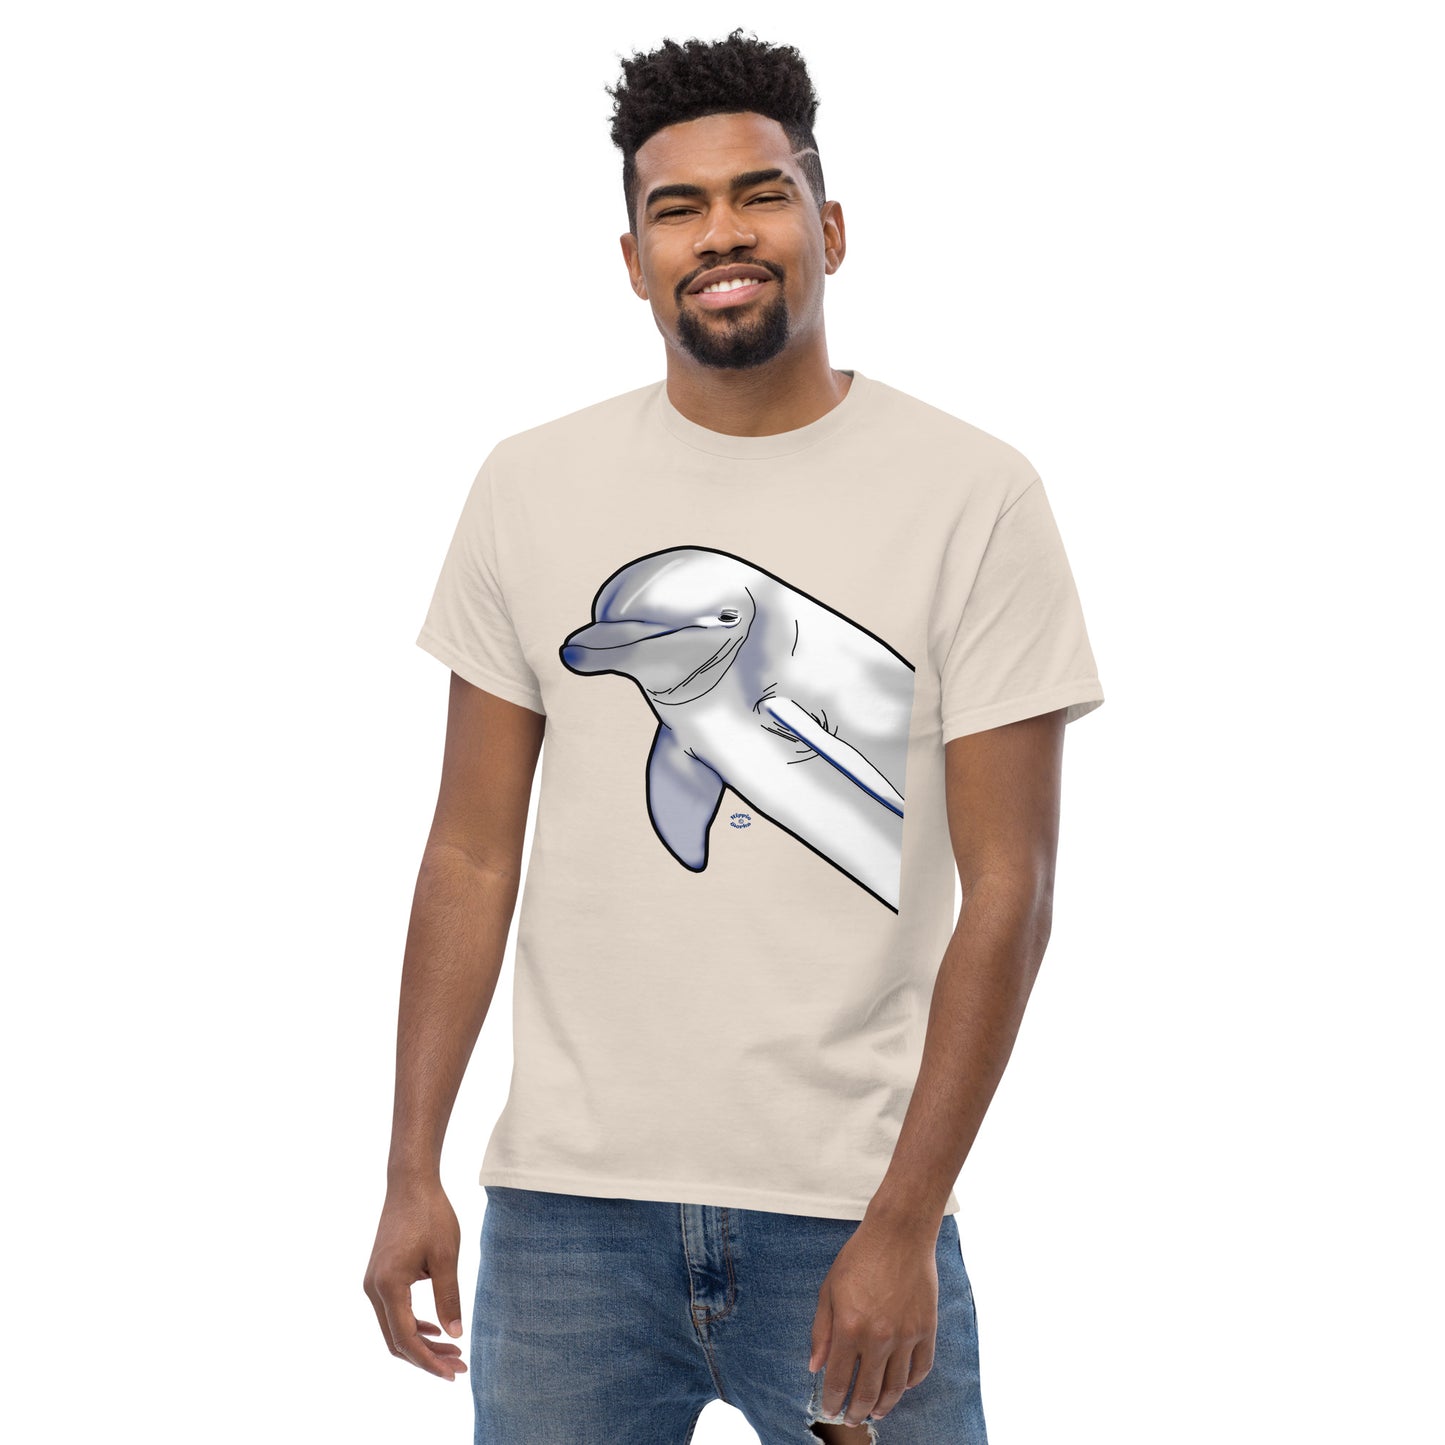 A picture of a man wearing a short sleeve tshirt with a printed picture of a dolphin - front side natural